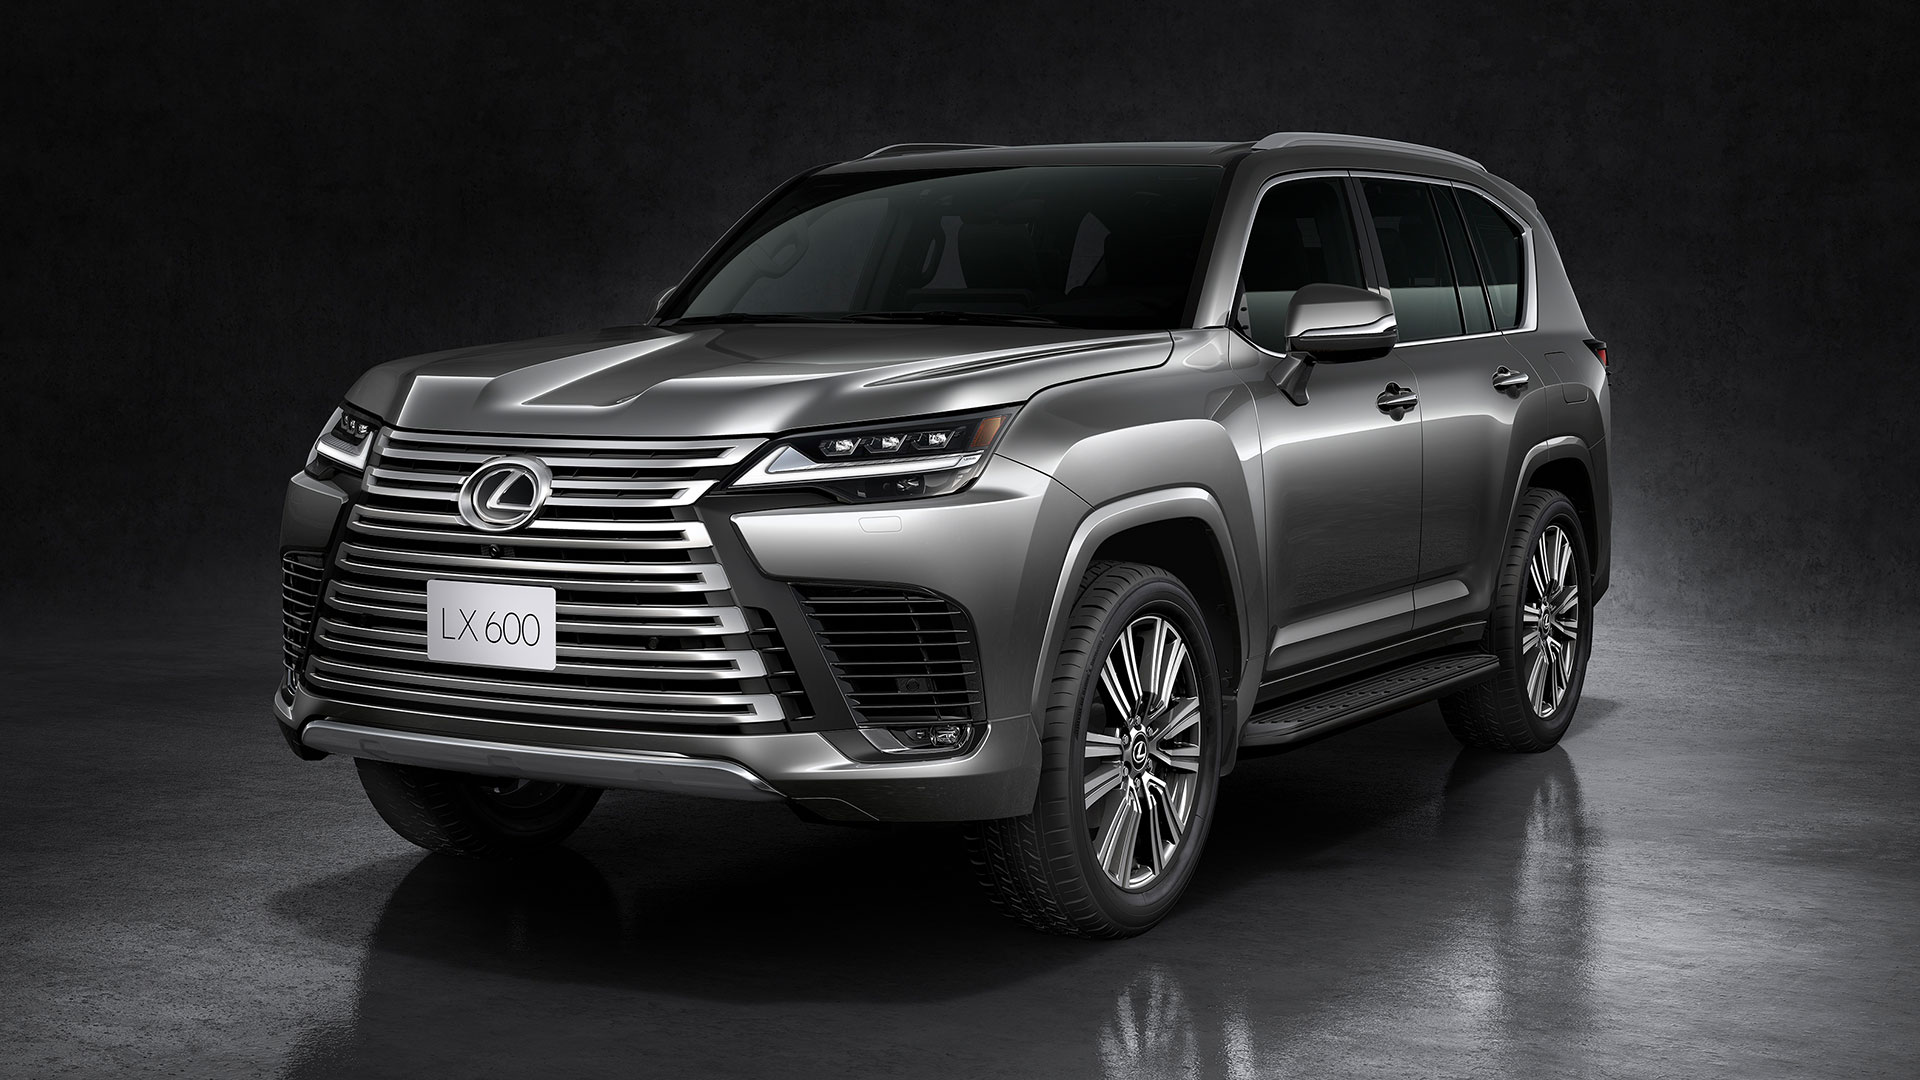 The all-new Lexus LX. (Overseas pre-production model shown. Australian grades, features & specifications may differ.)